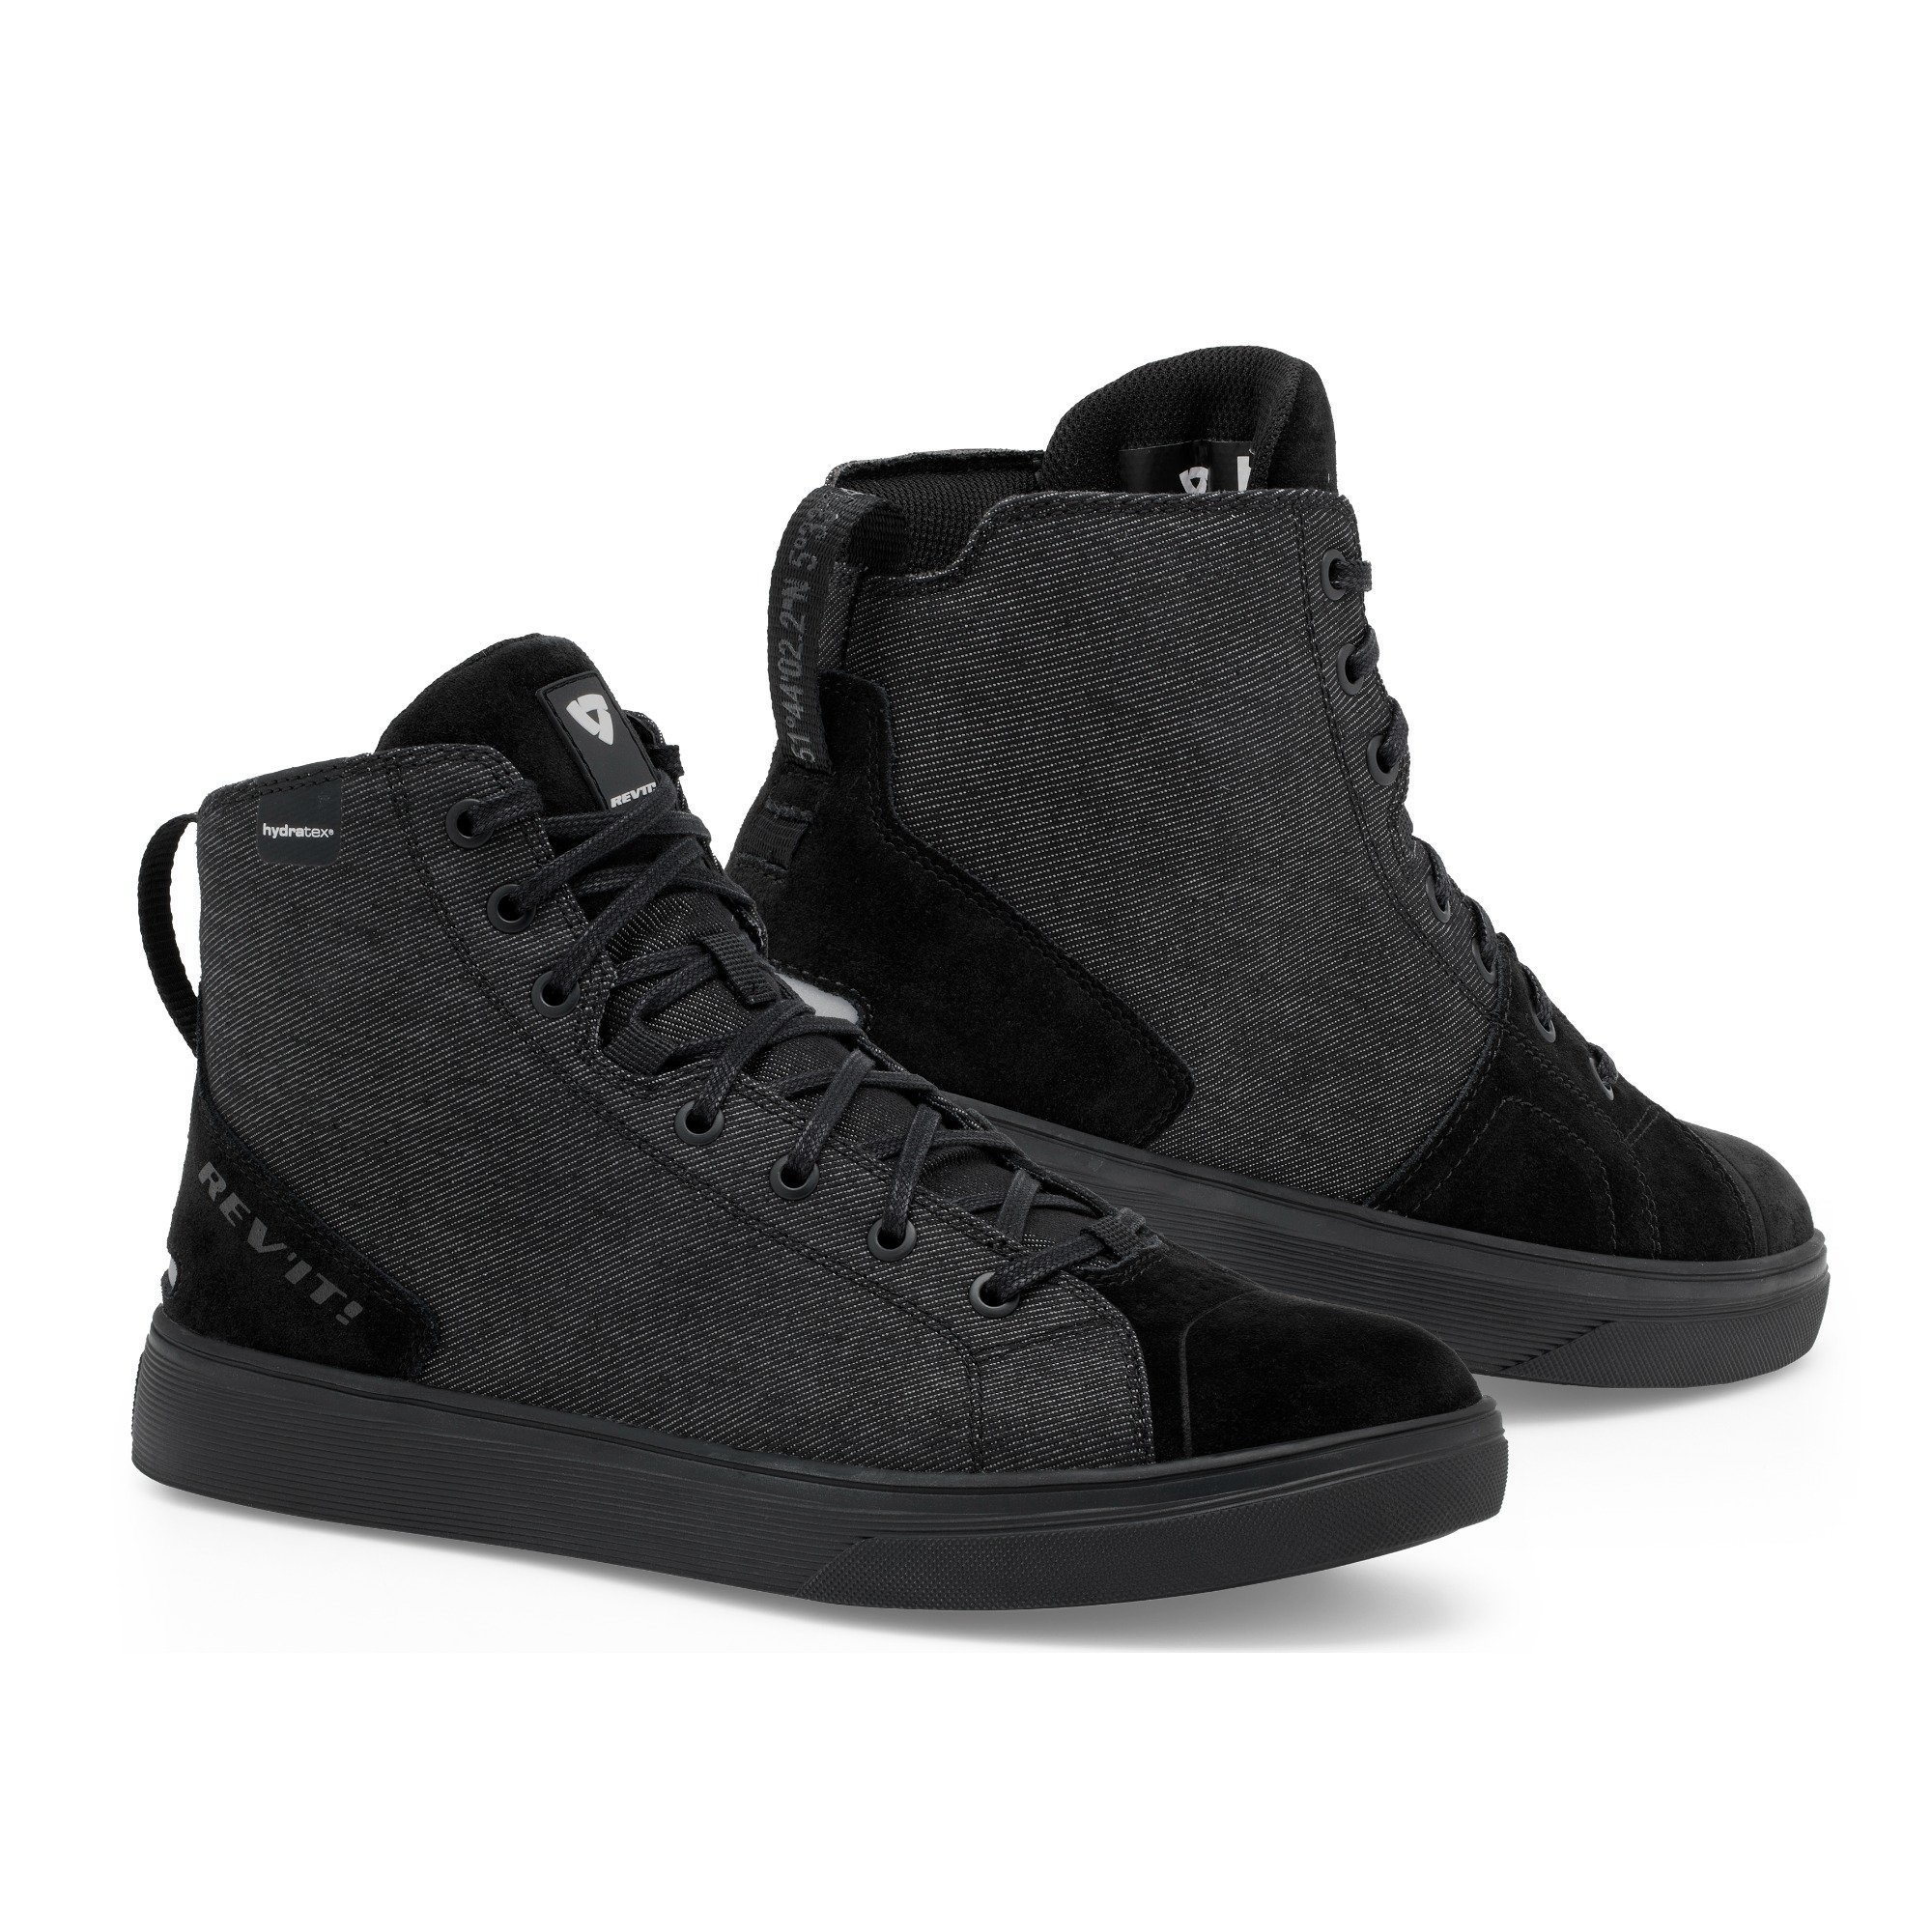 Image of REV'IT! Delta H2O Shoes Black Size 41 ID 8700001356350